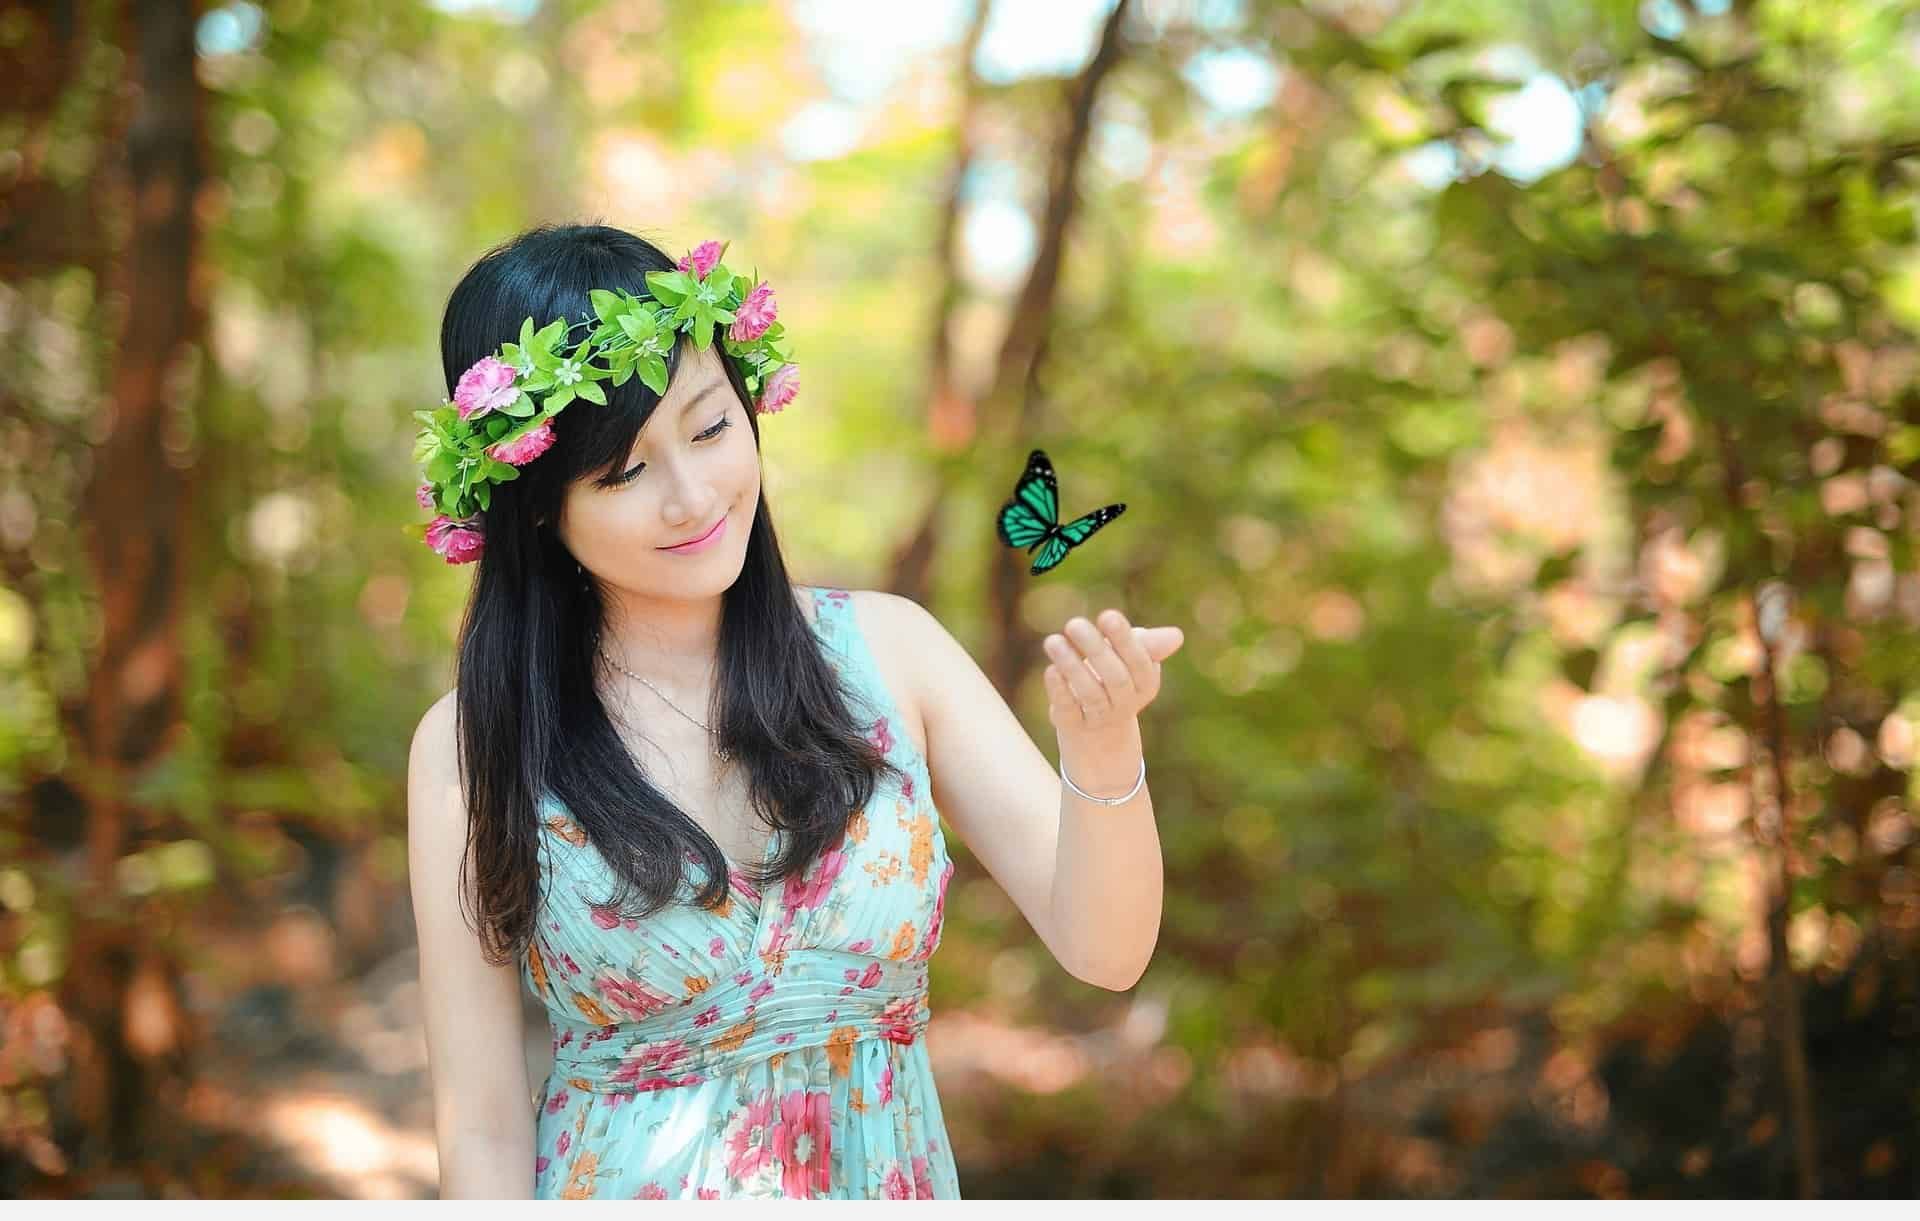 Butterfly Girl Wallpaper Image With Girl Wallpaper & Background Download